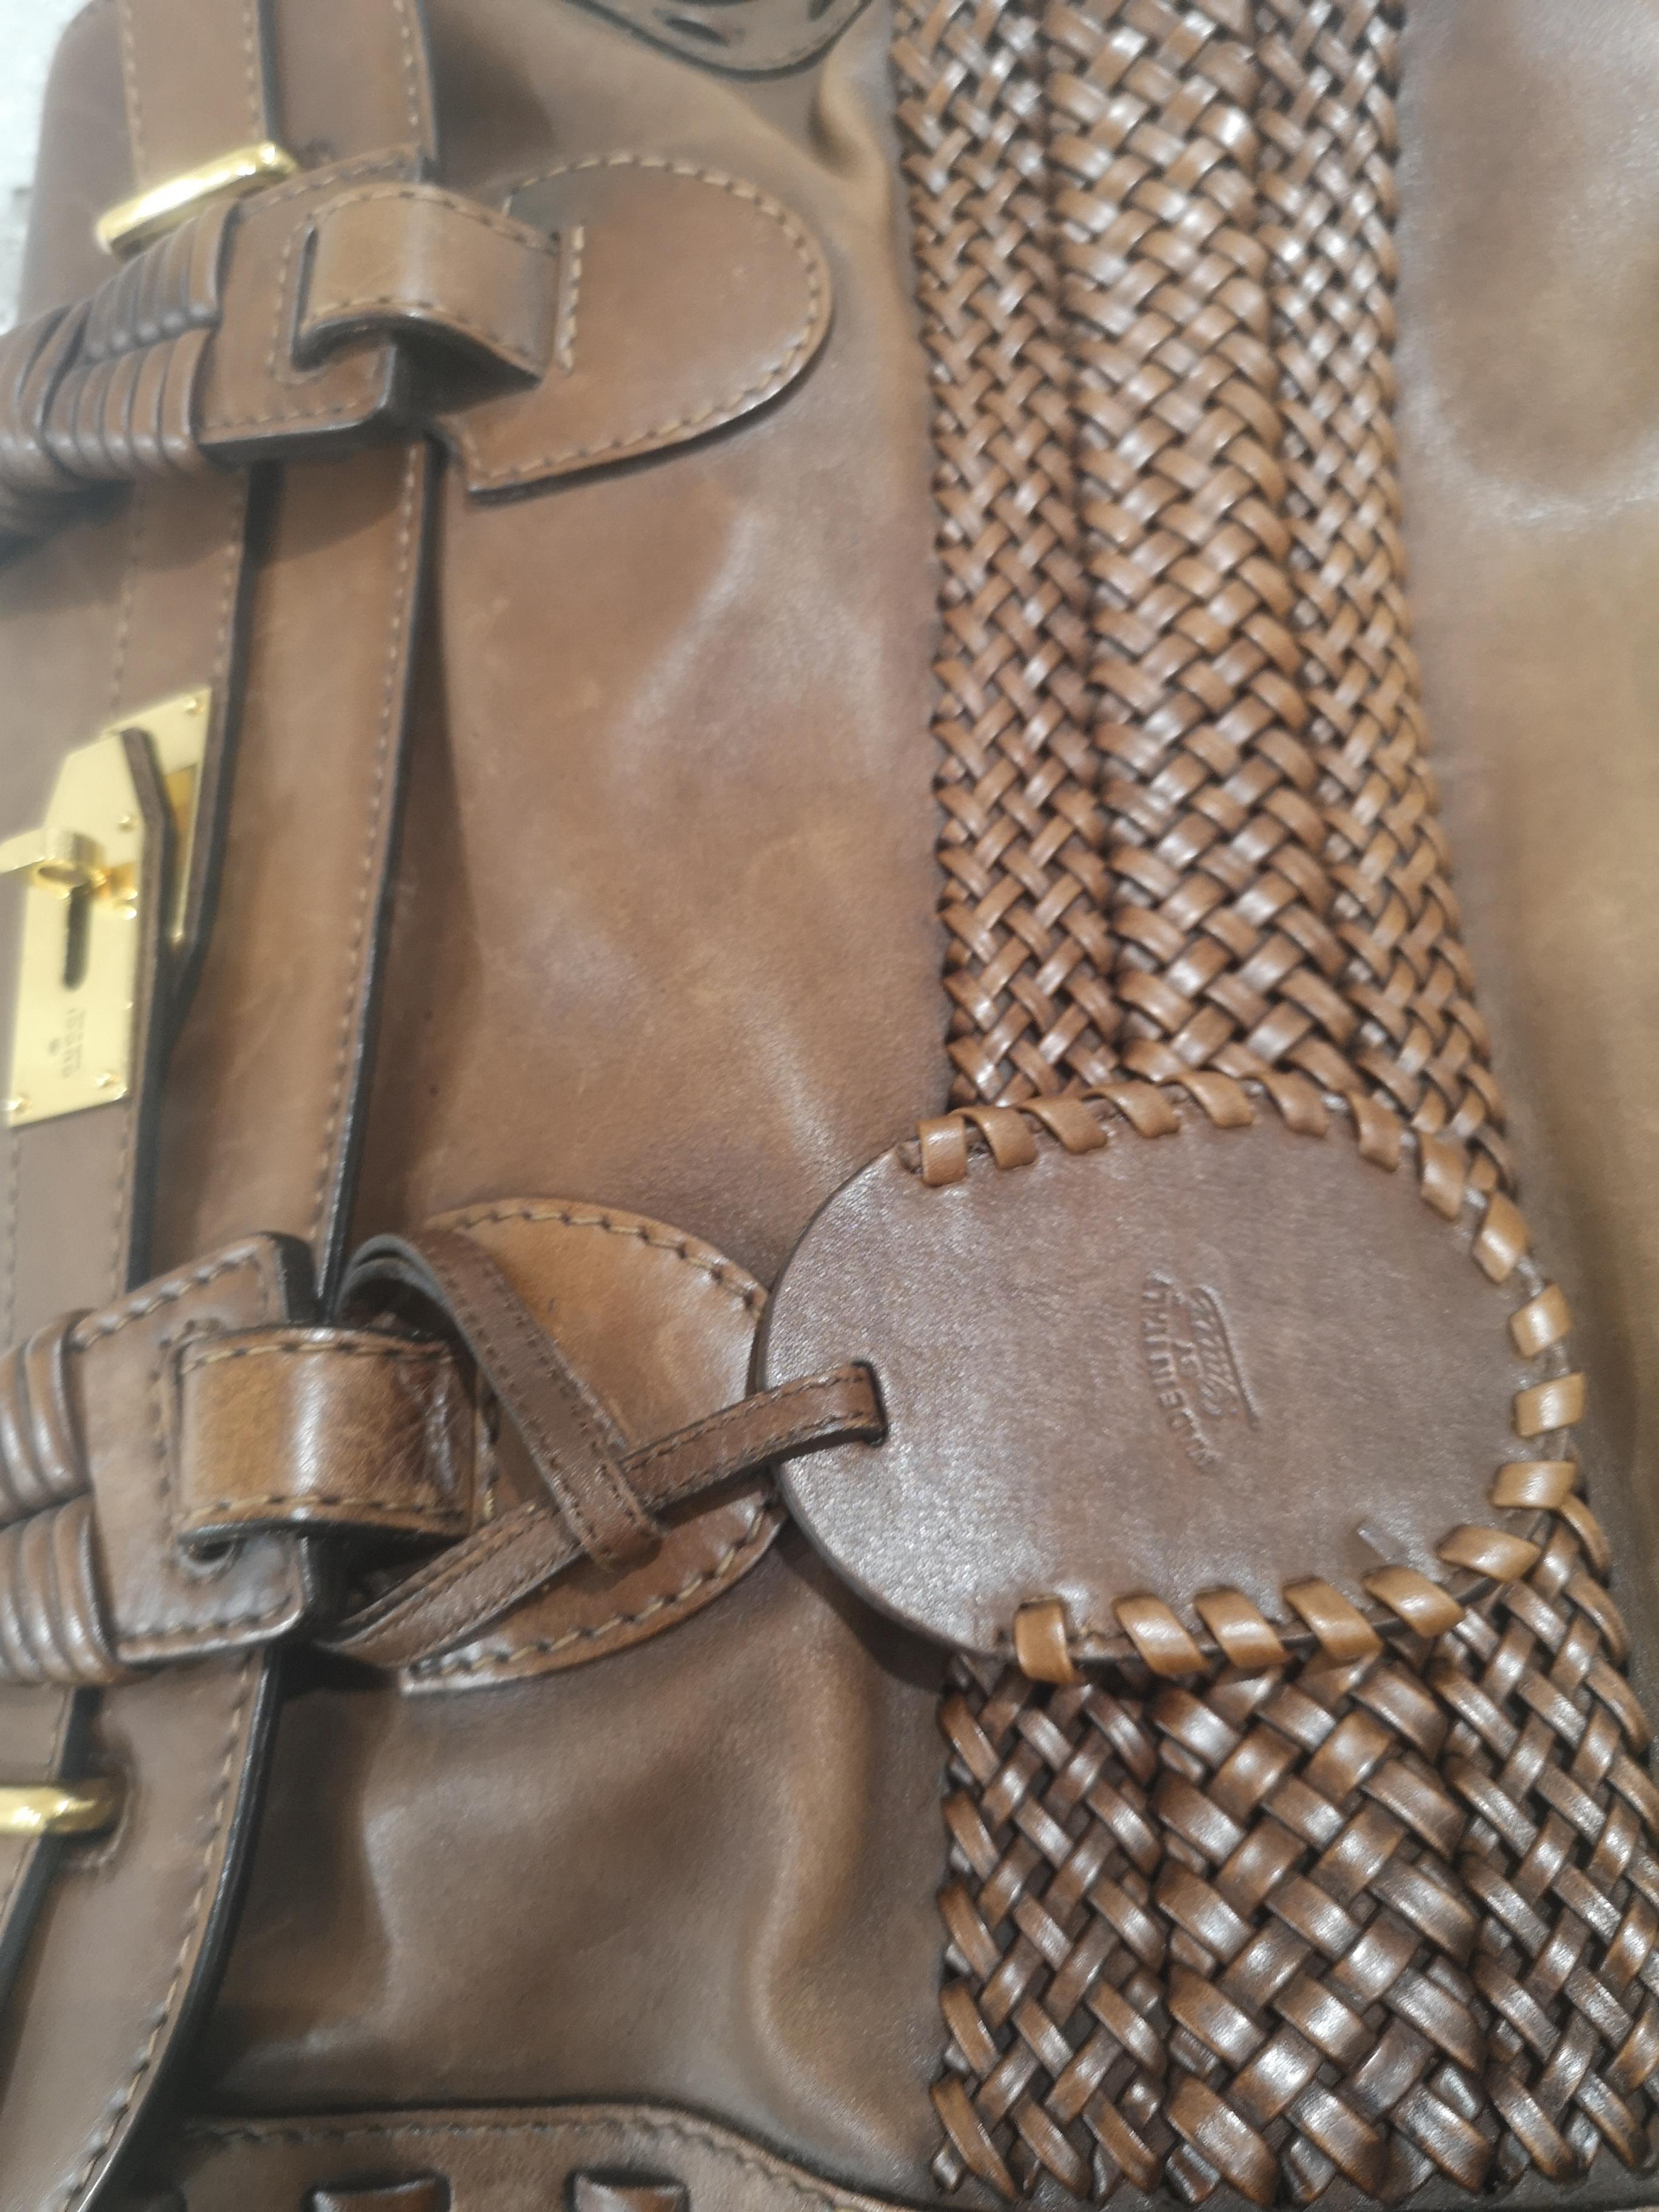 Gucci brown leather handle shoulder bag
Embellishged with gold tone hardware and braided leather
totally made in italy
measurements: 30 * 40 cm, 20 cm depth (heigh of the bag without handle)